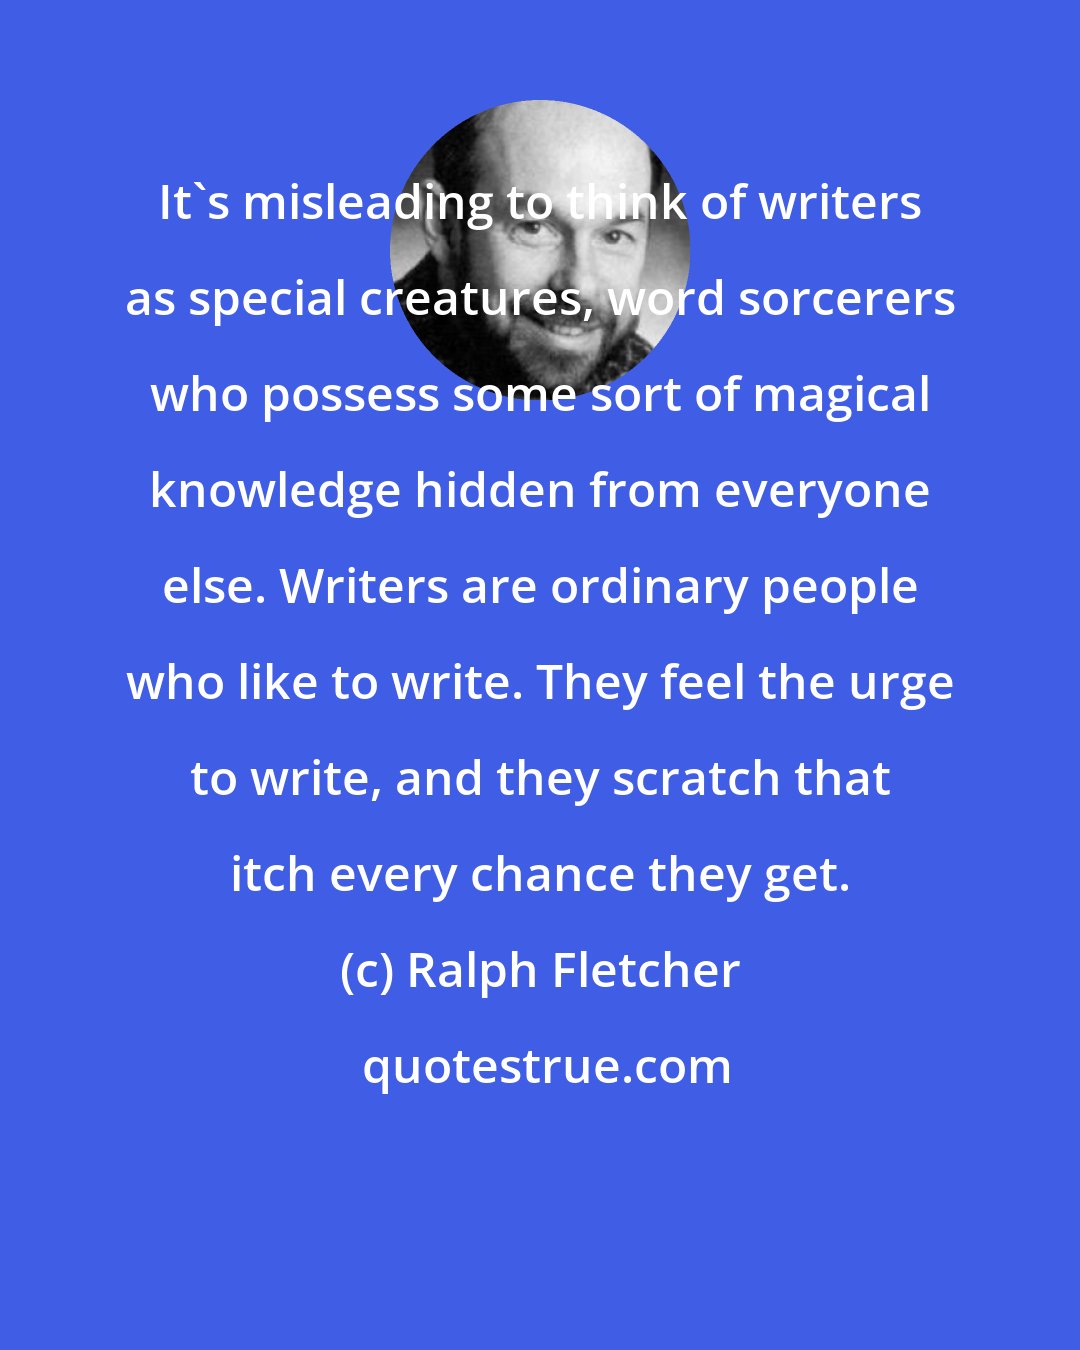 Ralph Fletcher: It's misleading to think of writers as special creatures, word sorcerers who possess some sort of magical knowledge hidden from everyone else. Writers are ordinary people who like to write. They feel the urge to write, and they scratch that itch every chance they get.